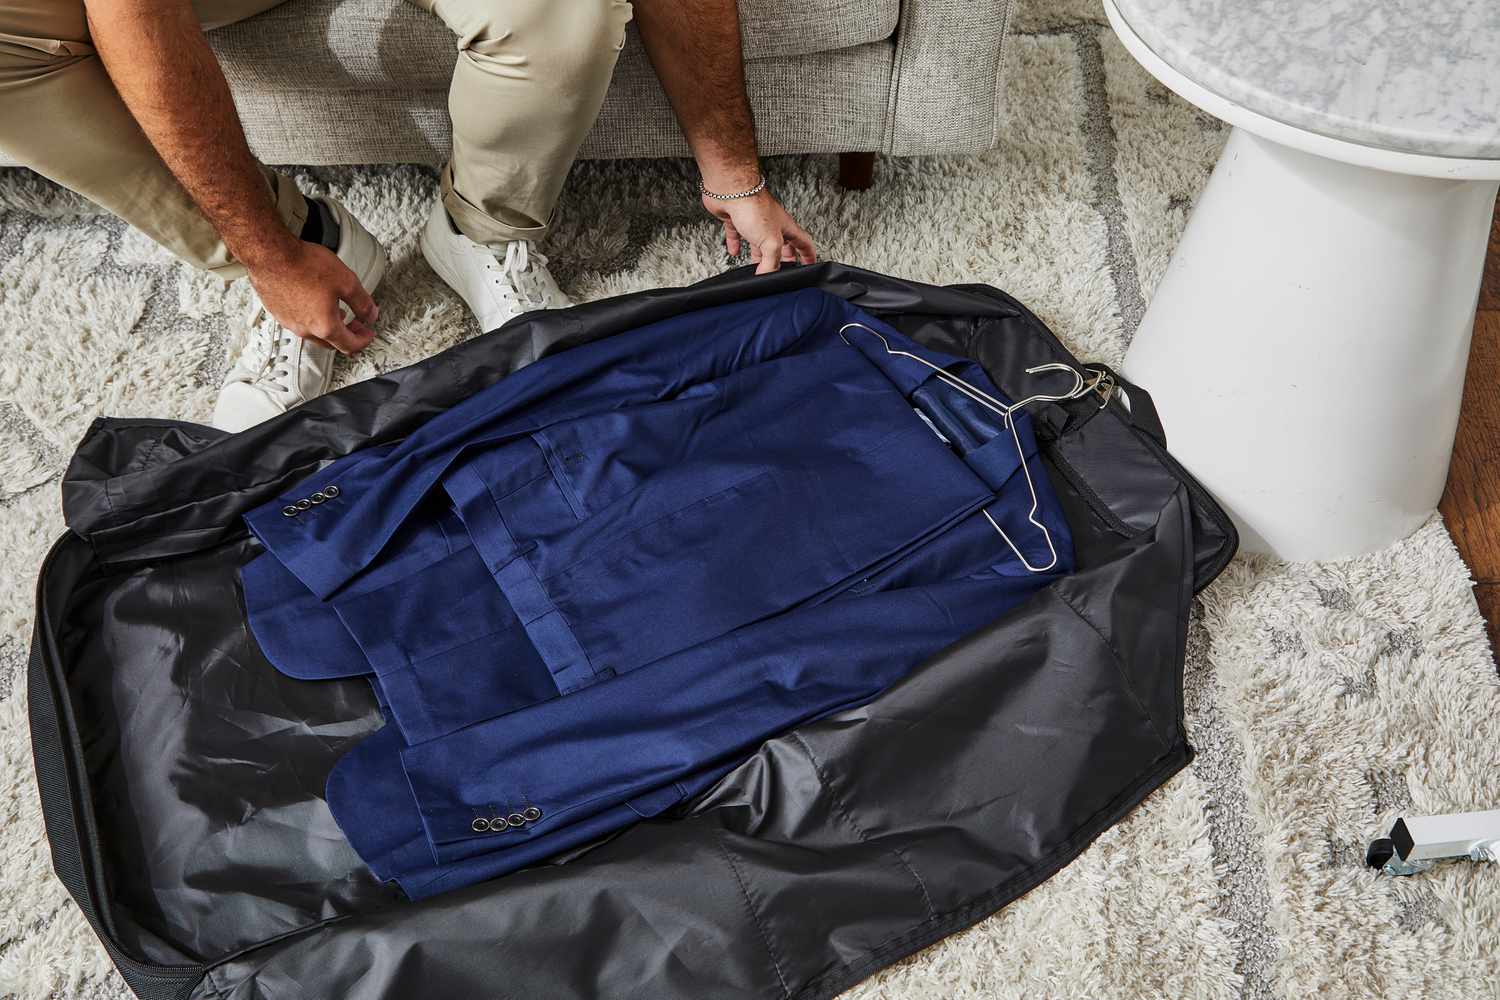 Zegur Suit Carry On Garment Bag laying on the floor while hands are reaching for the bag